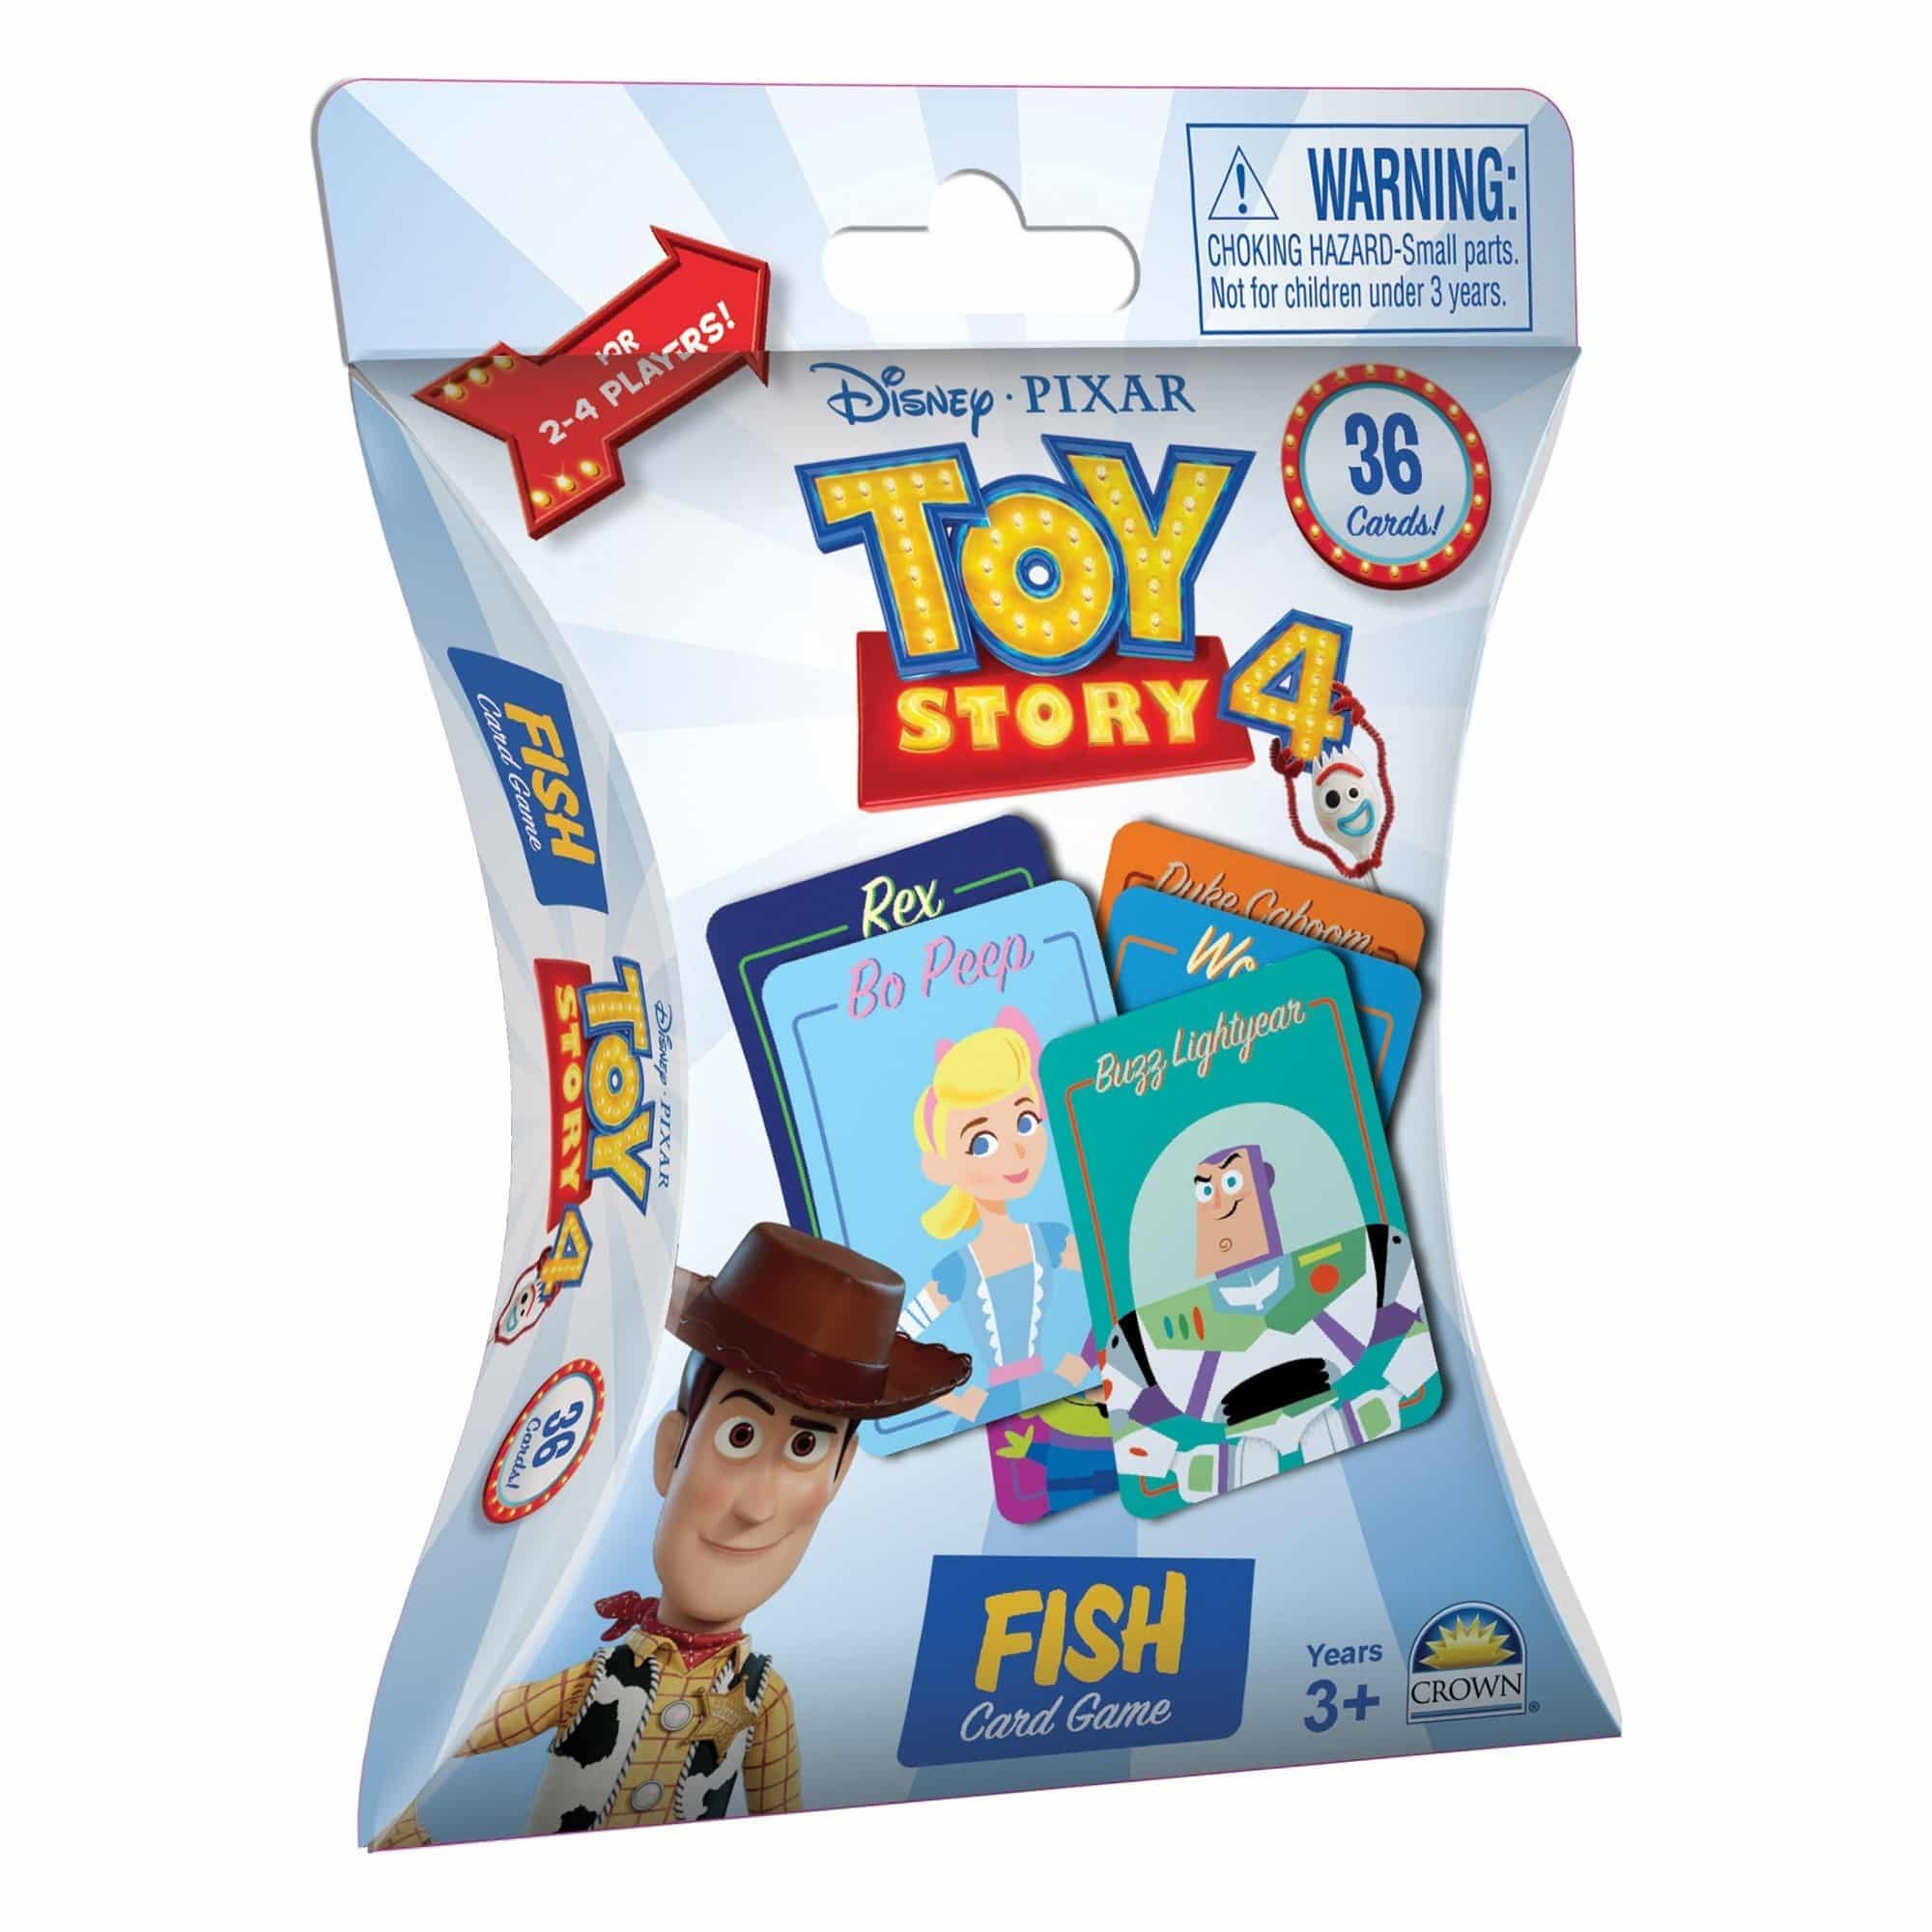 Toy Story 4 - Fish Card Game